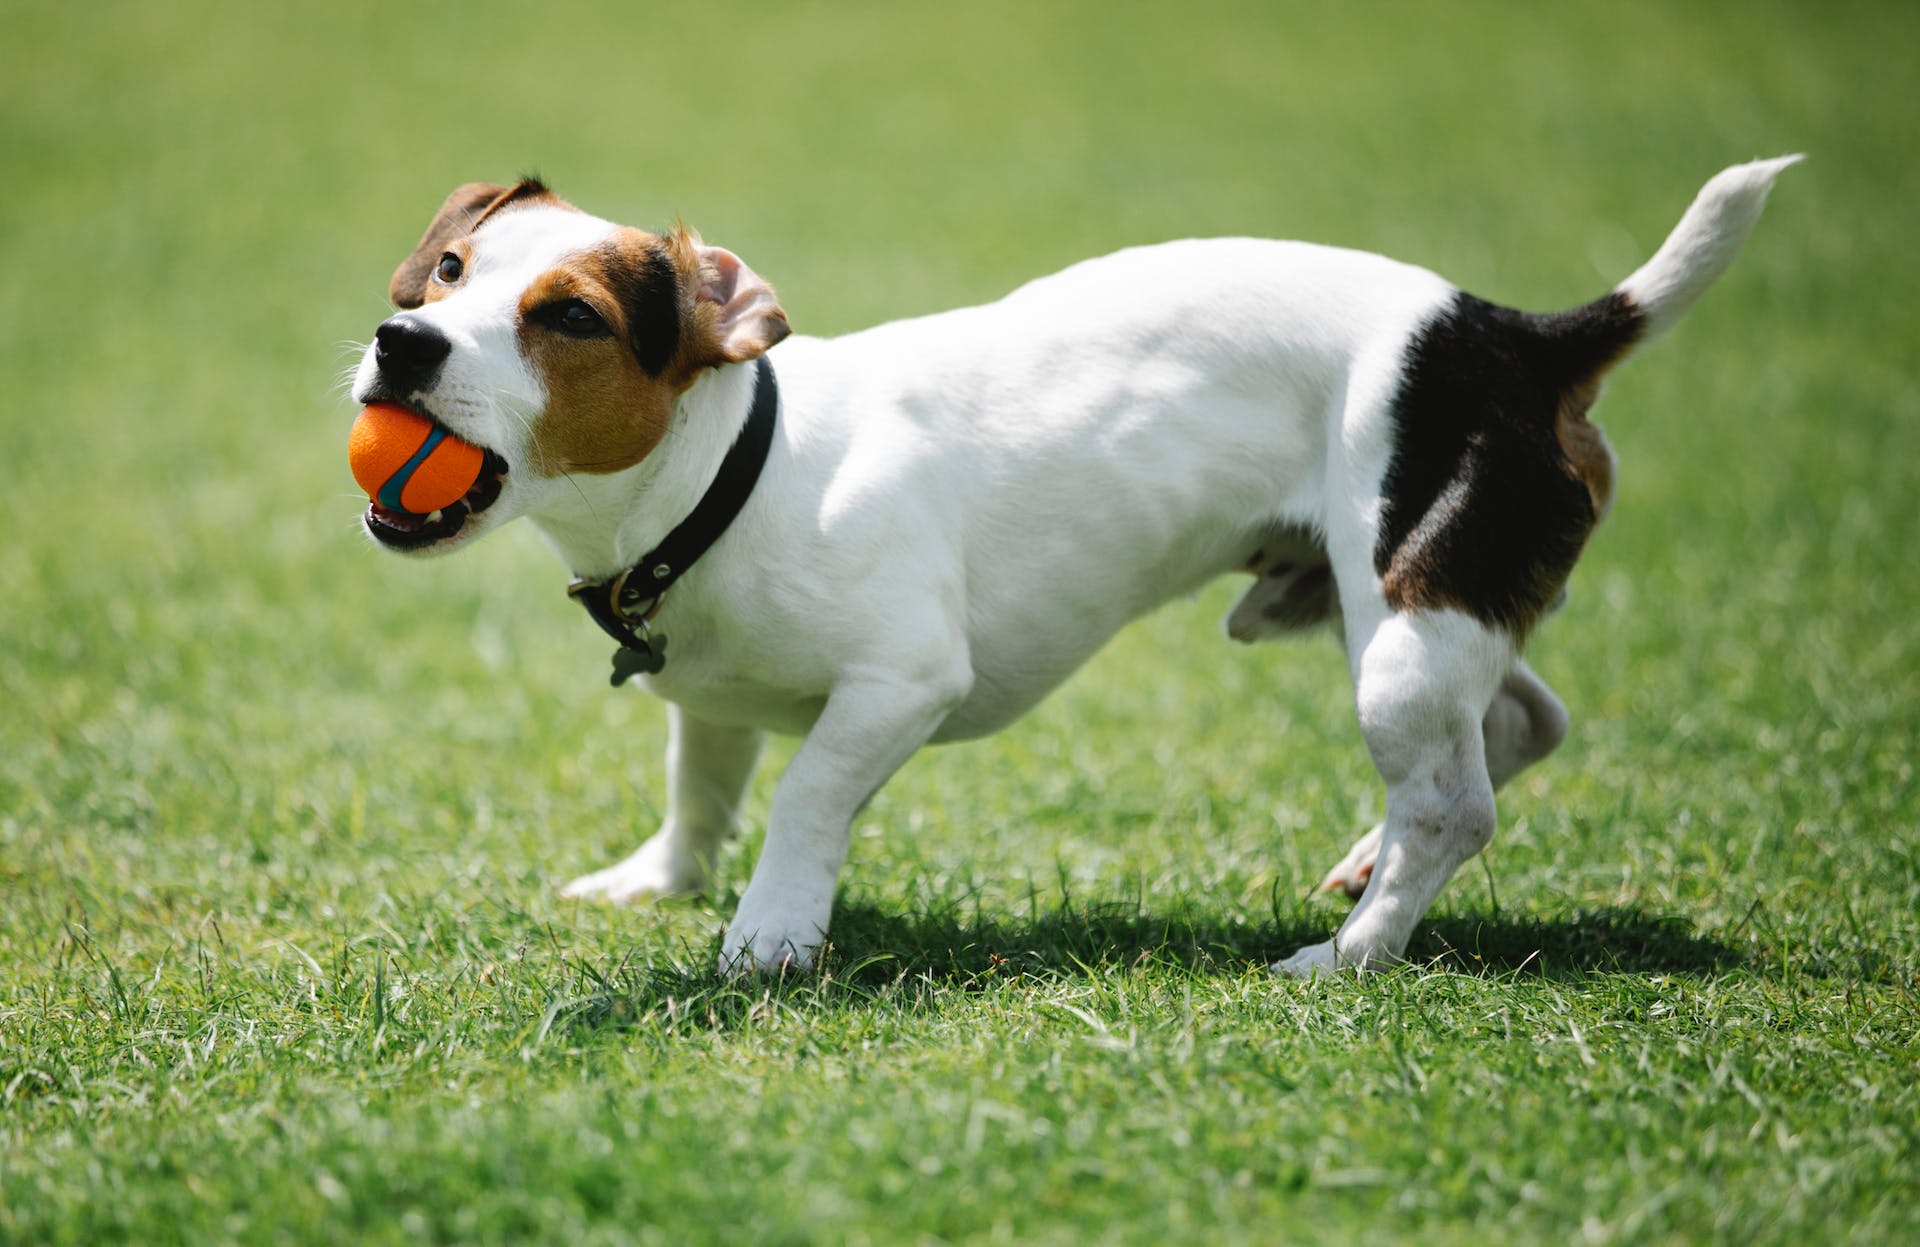 A Jack Russell terrier with a ball in their mouth in an open field